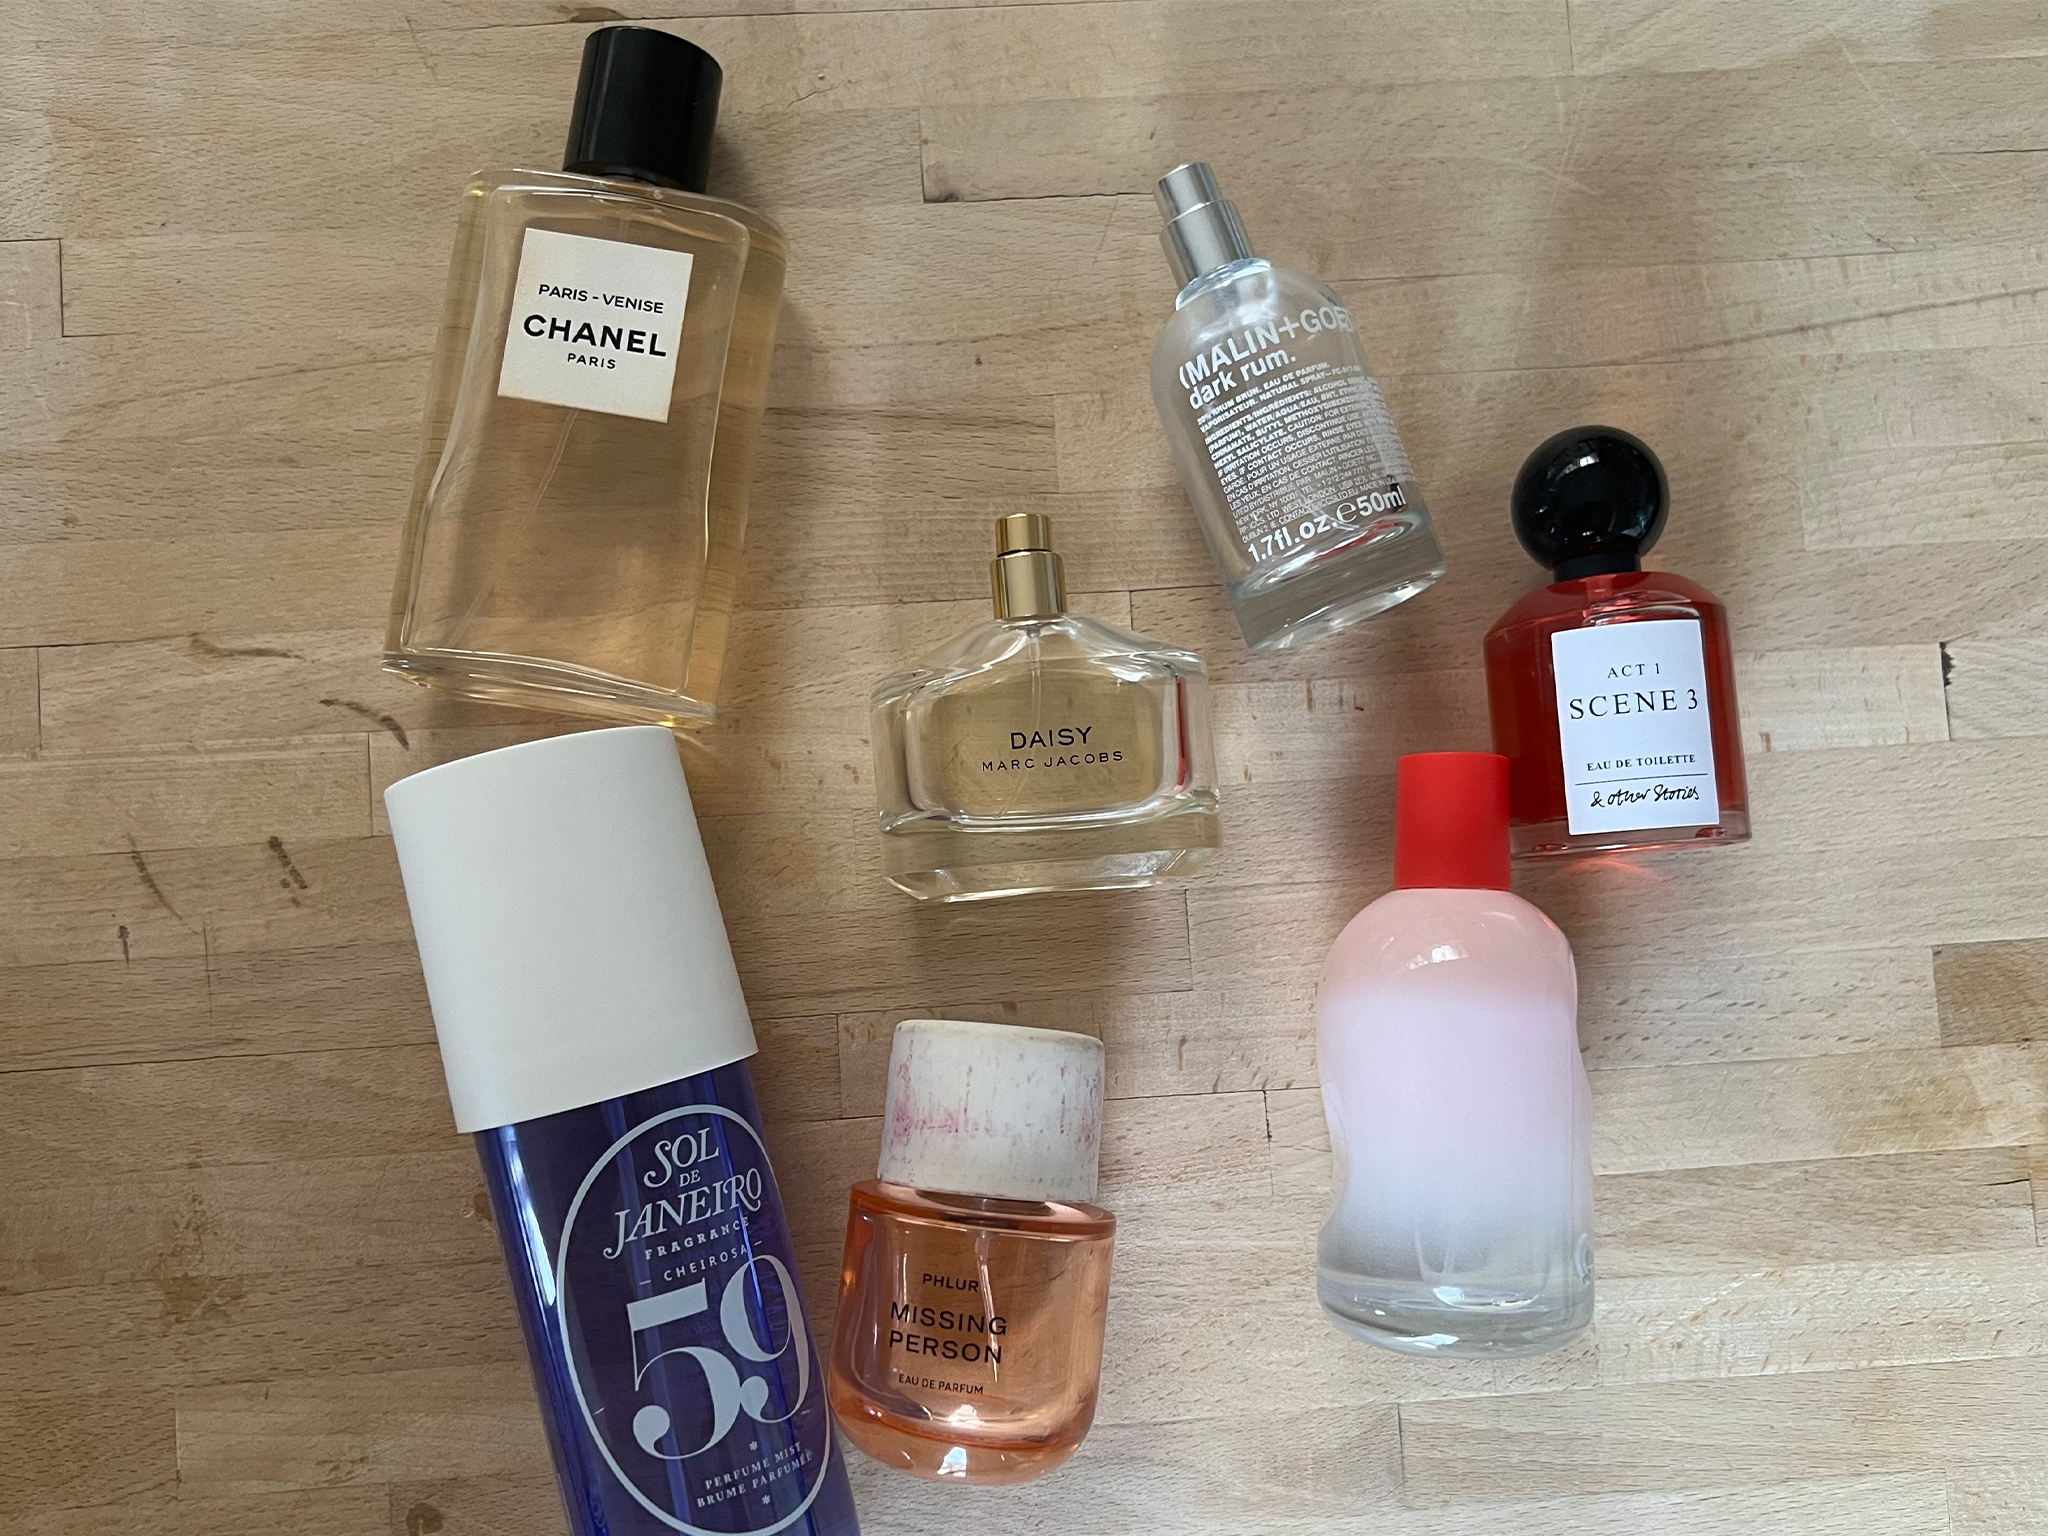 Just a few of the perfumes we tested for this round-up